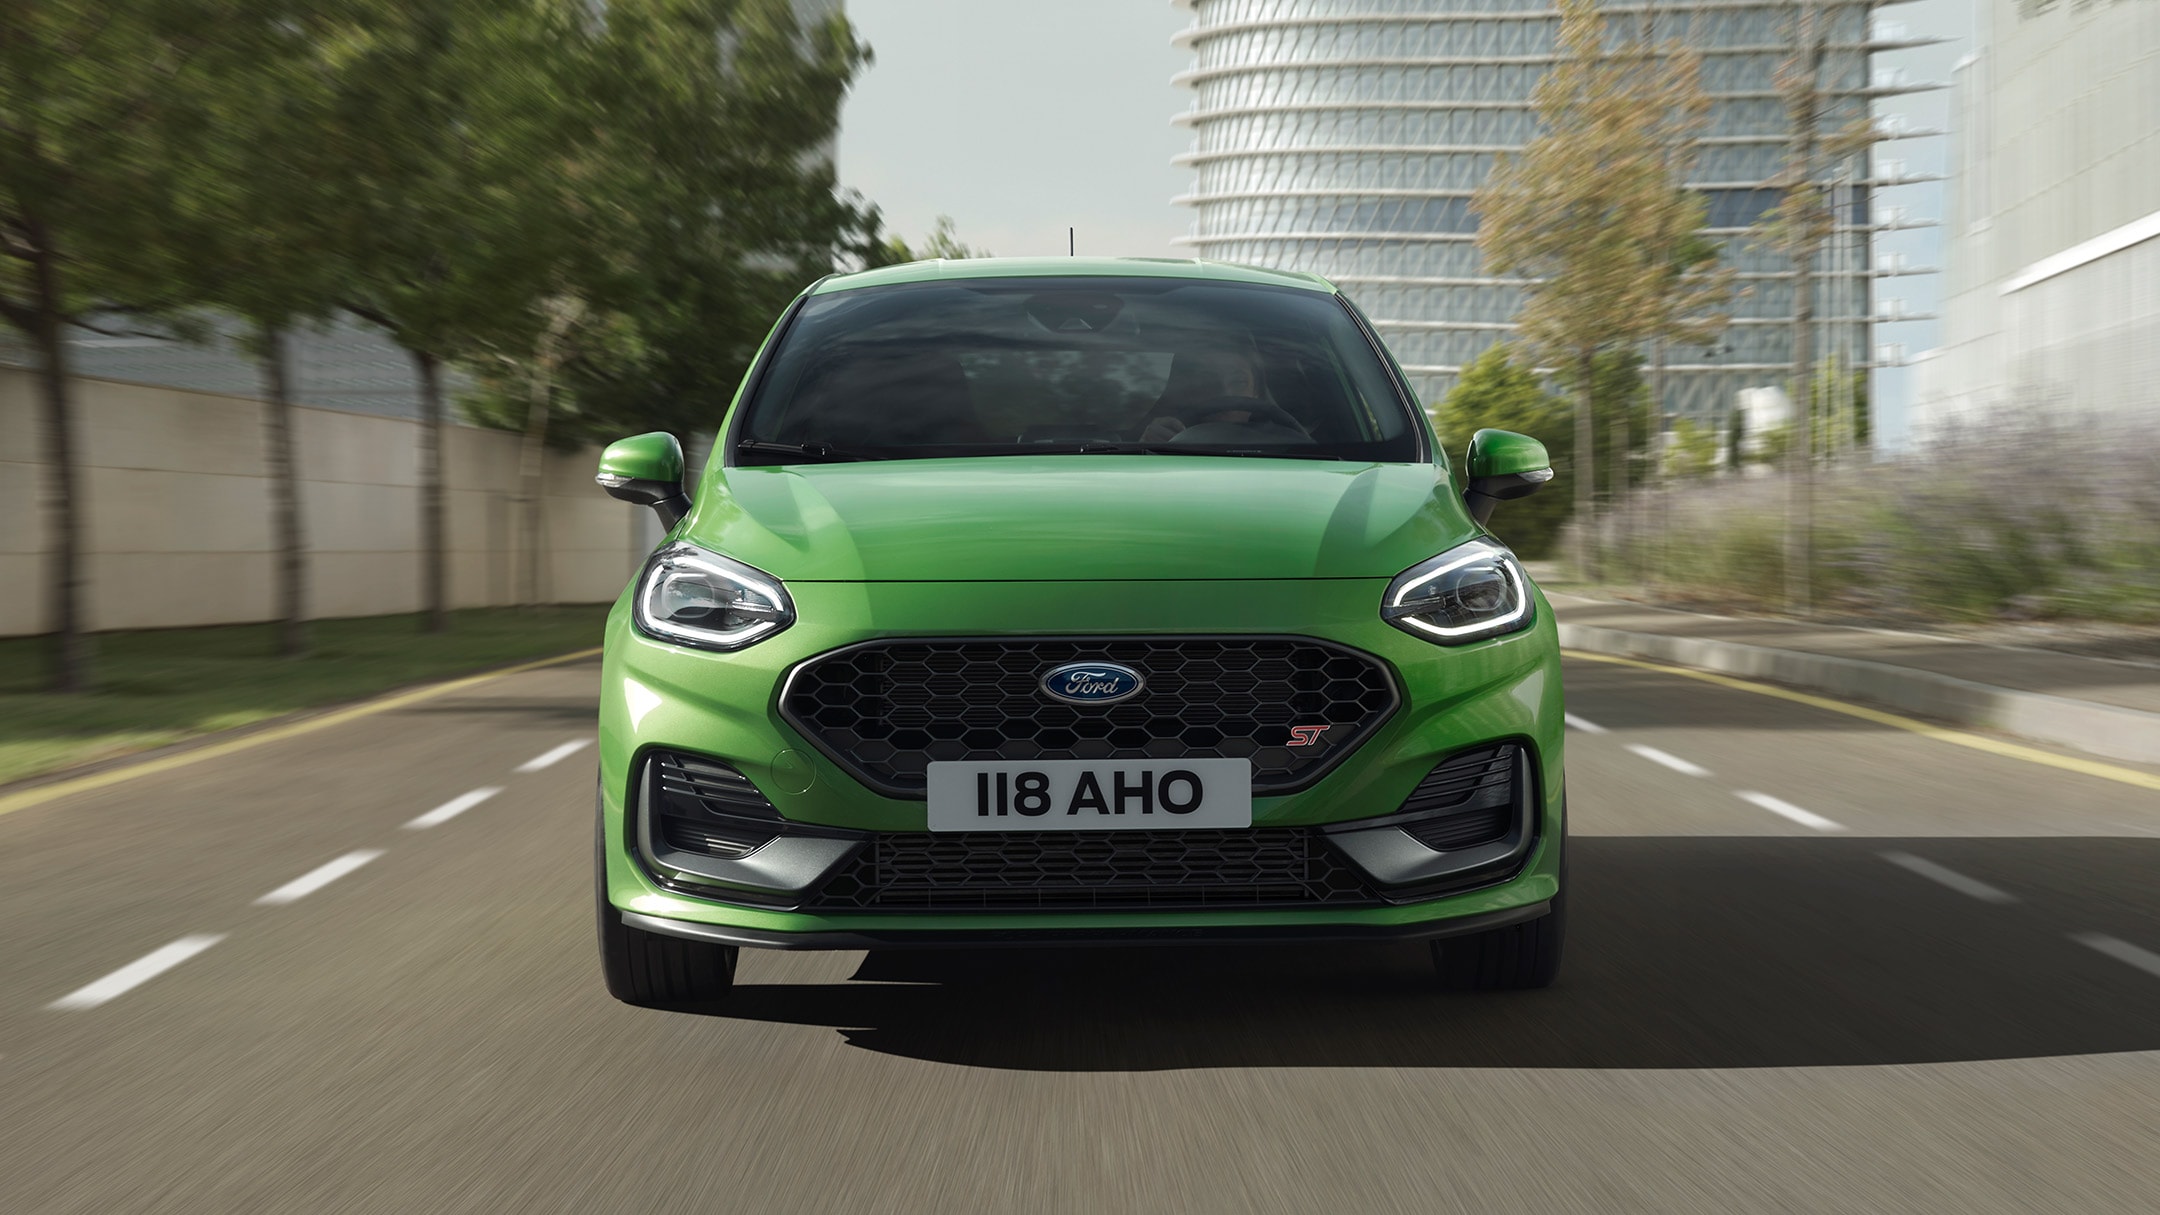 Ford Fiesta ST front view